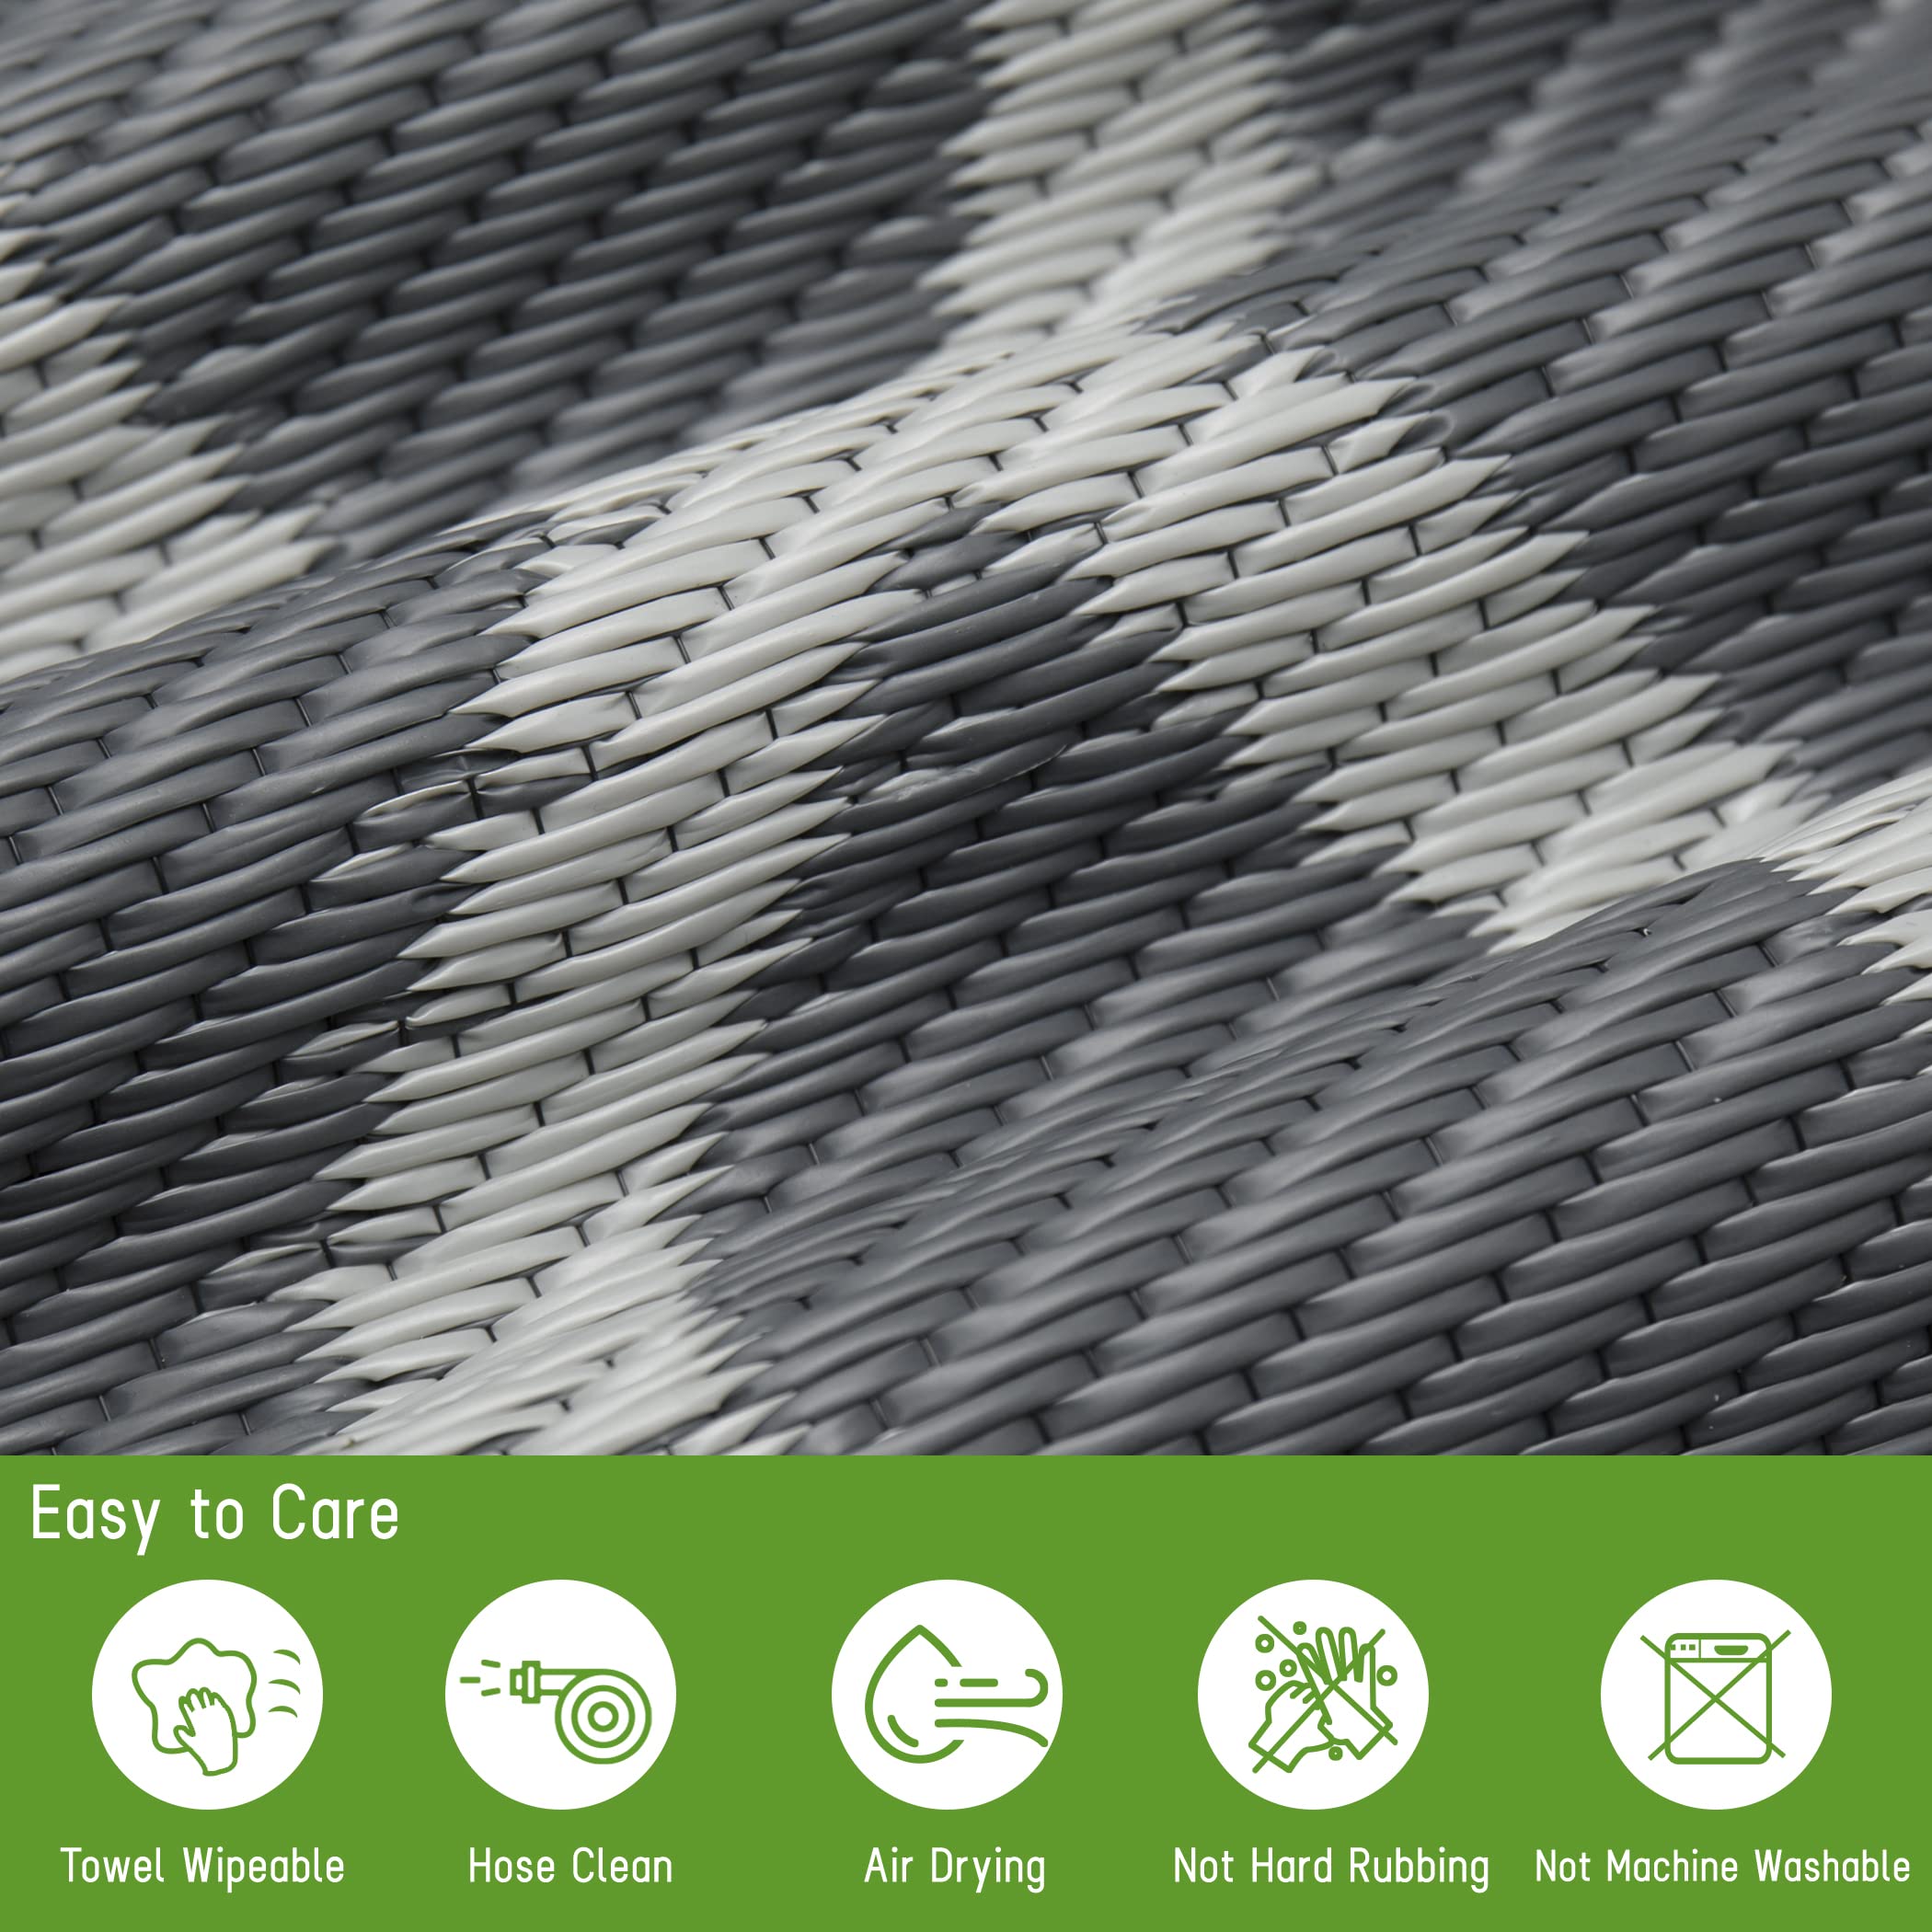 Easy-Going Reversible Outdoor Rugs 6x9ft Waterproof Plastic Straw Rug Stain & UV Resistant Floor Mat for Patio Porch RV Backyard Pool Deck Picnic Beach Trailer Camping (Moroccan Grey & Light Grey)